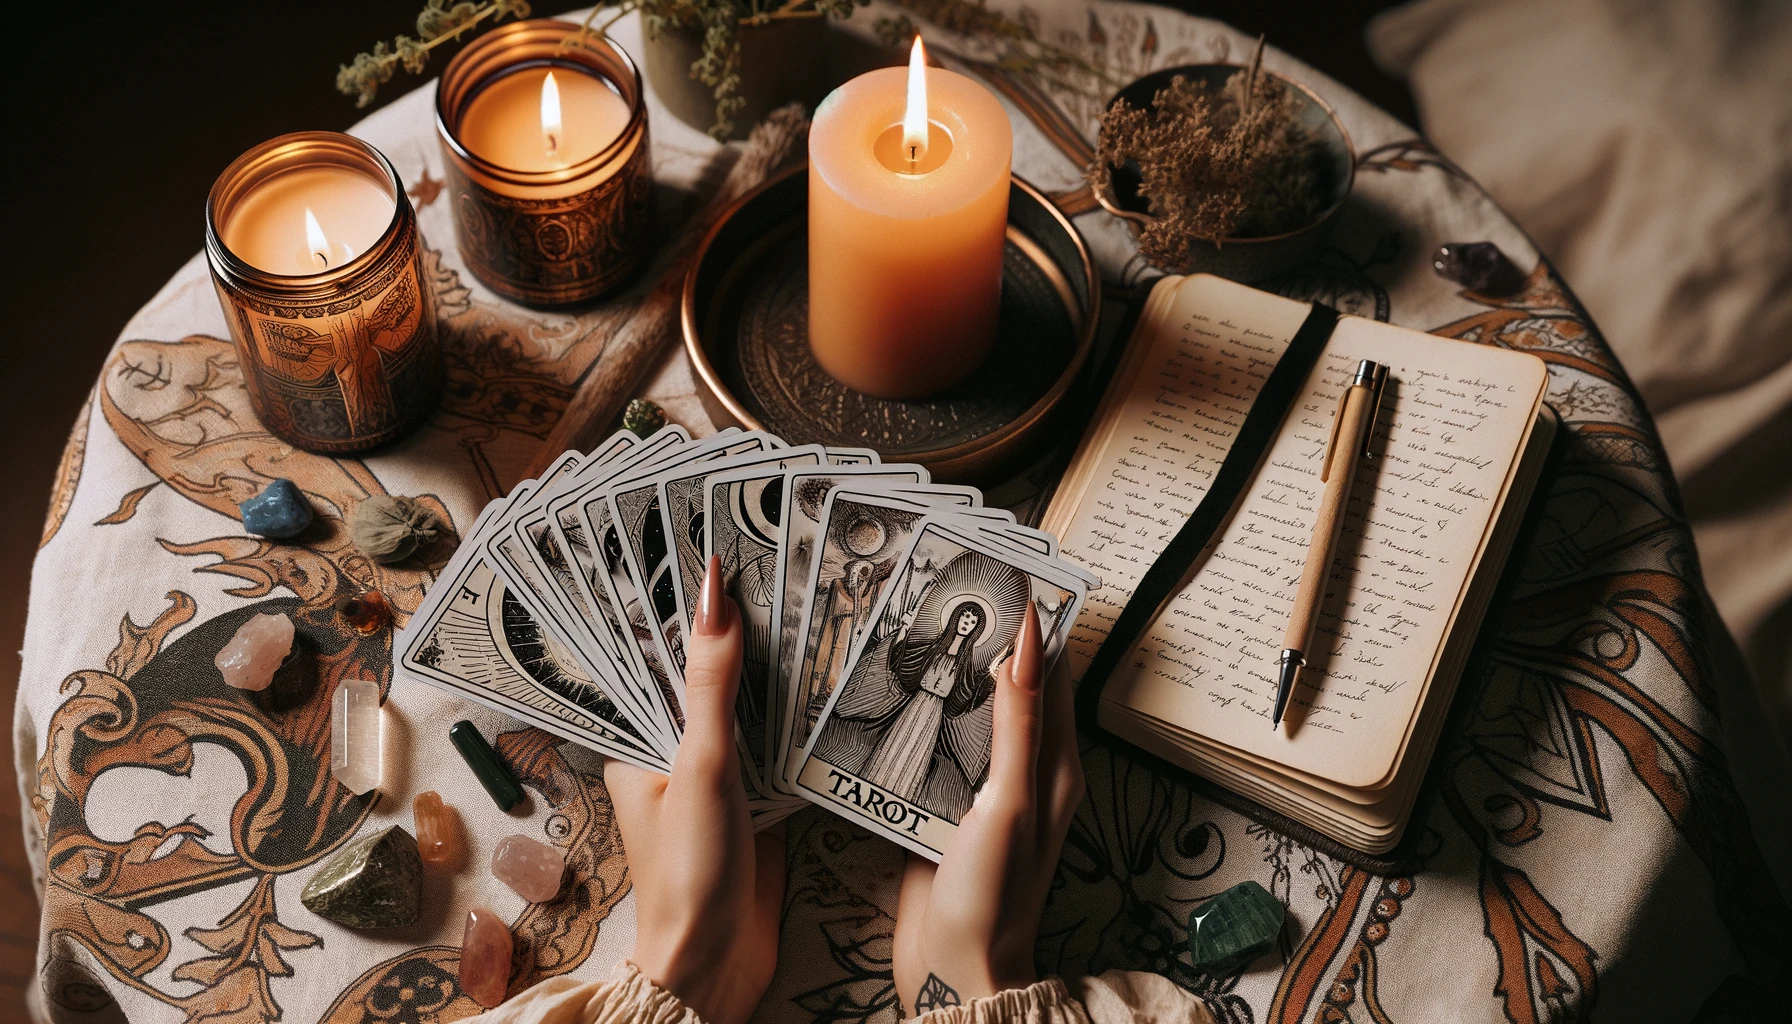 An image featuring hands holding a tarot deck the cards slightly fanned out to display their unique designs. Beside the hands a candle burns steadil